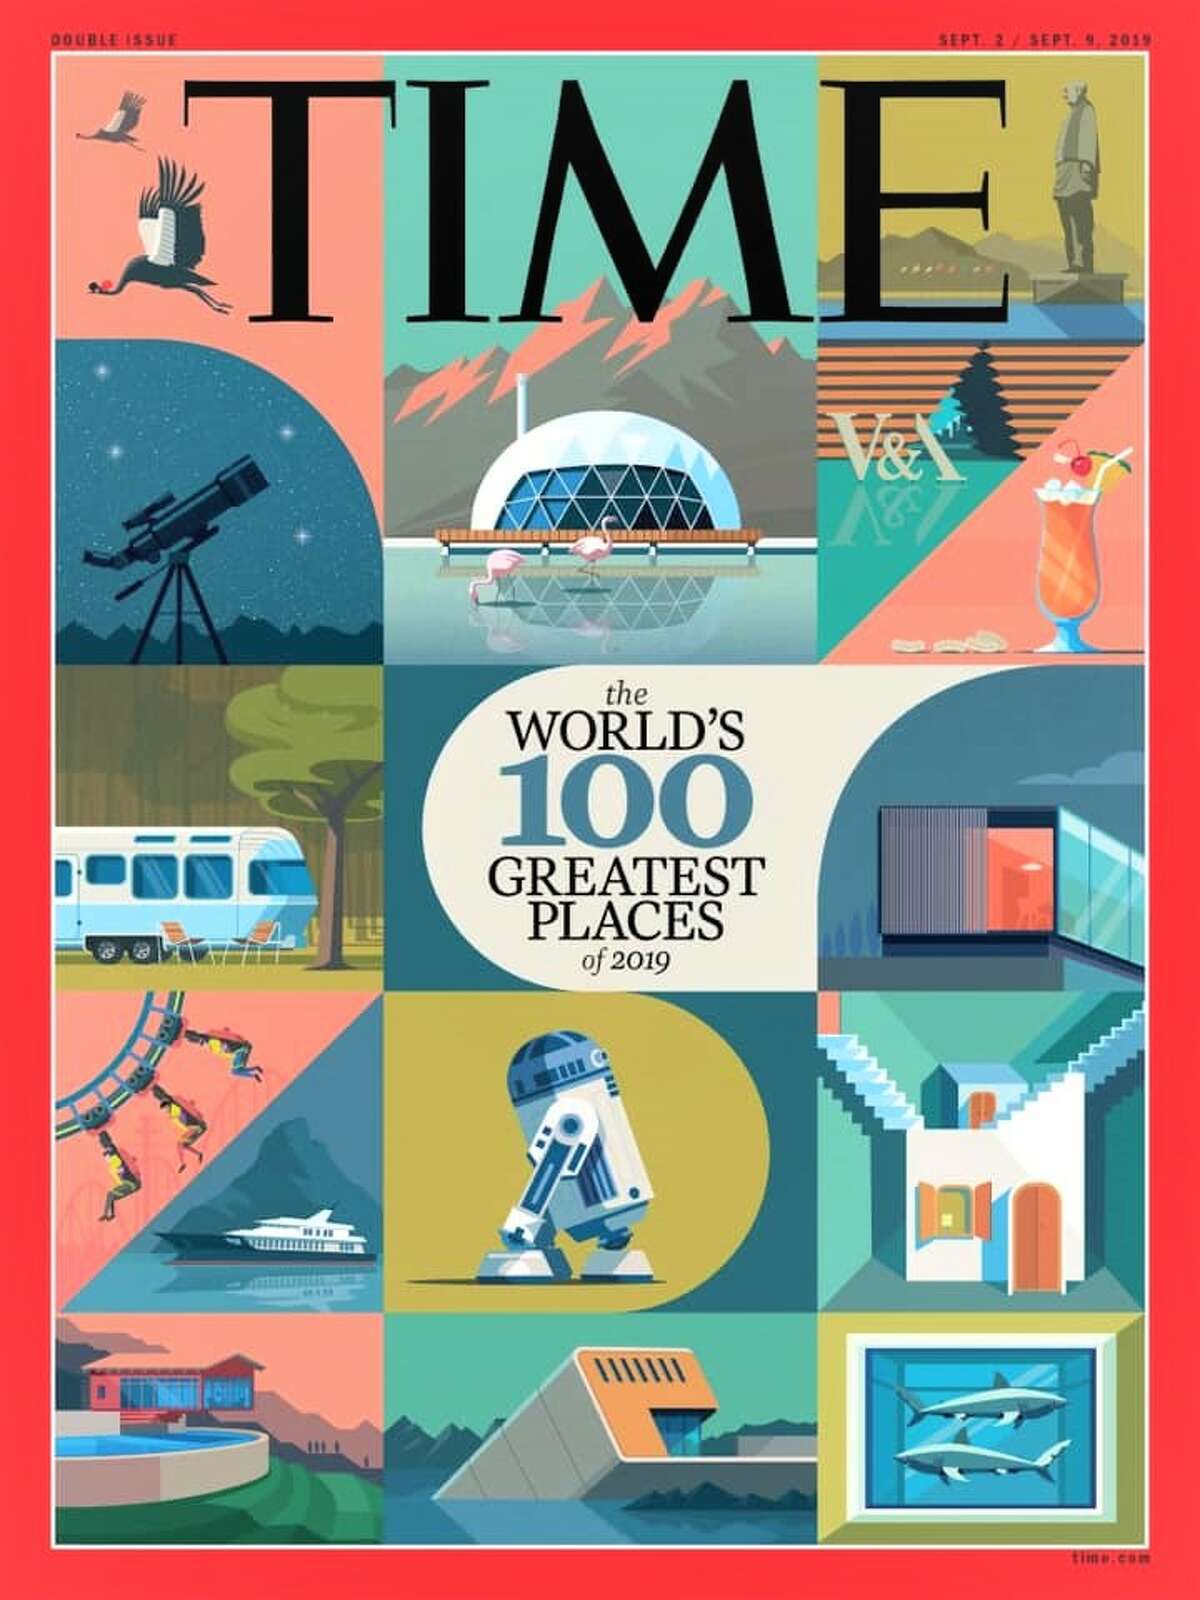 Time Magazine's 'The World's 100 Greatest Places 2019' list includes Indigo.